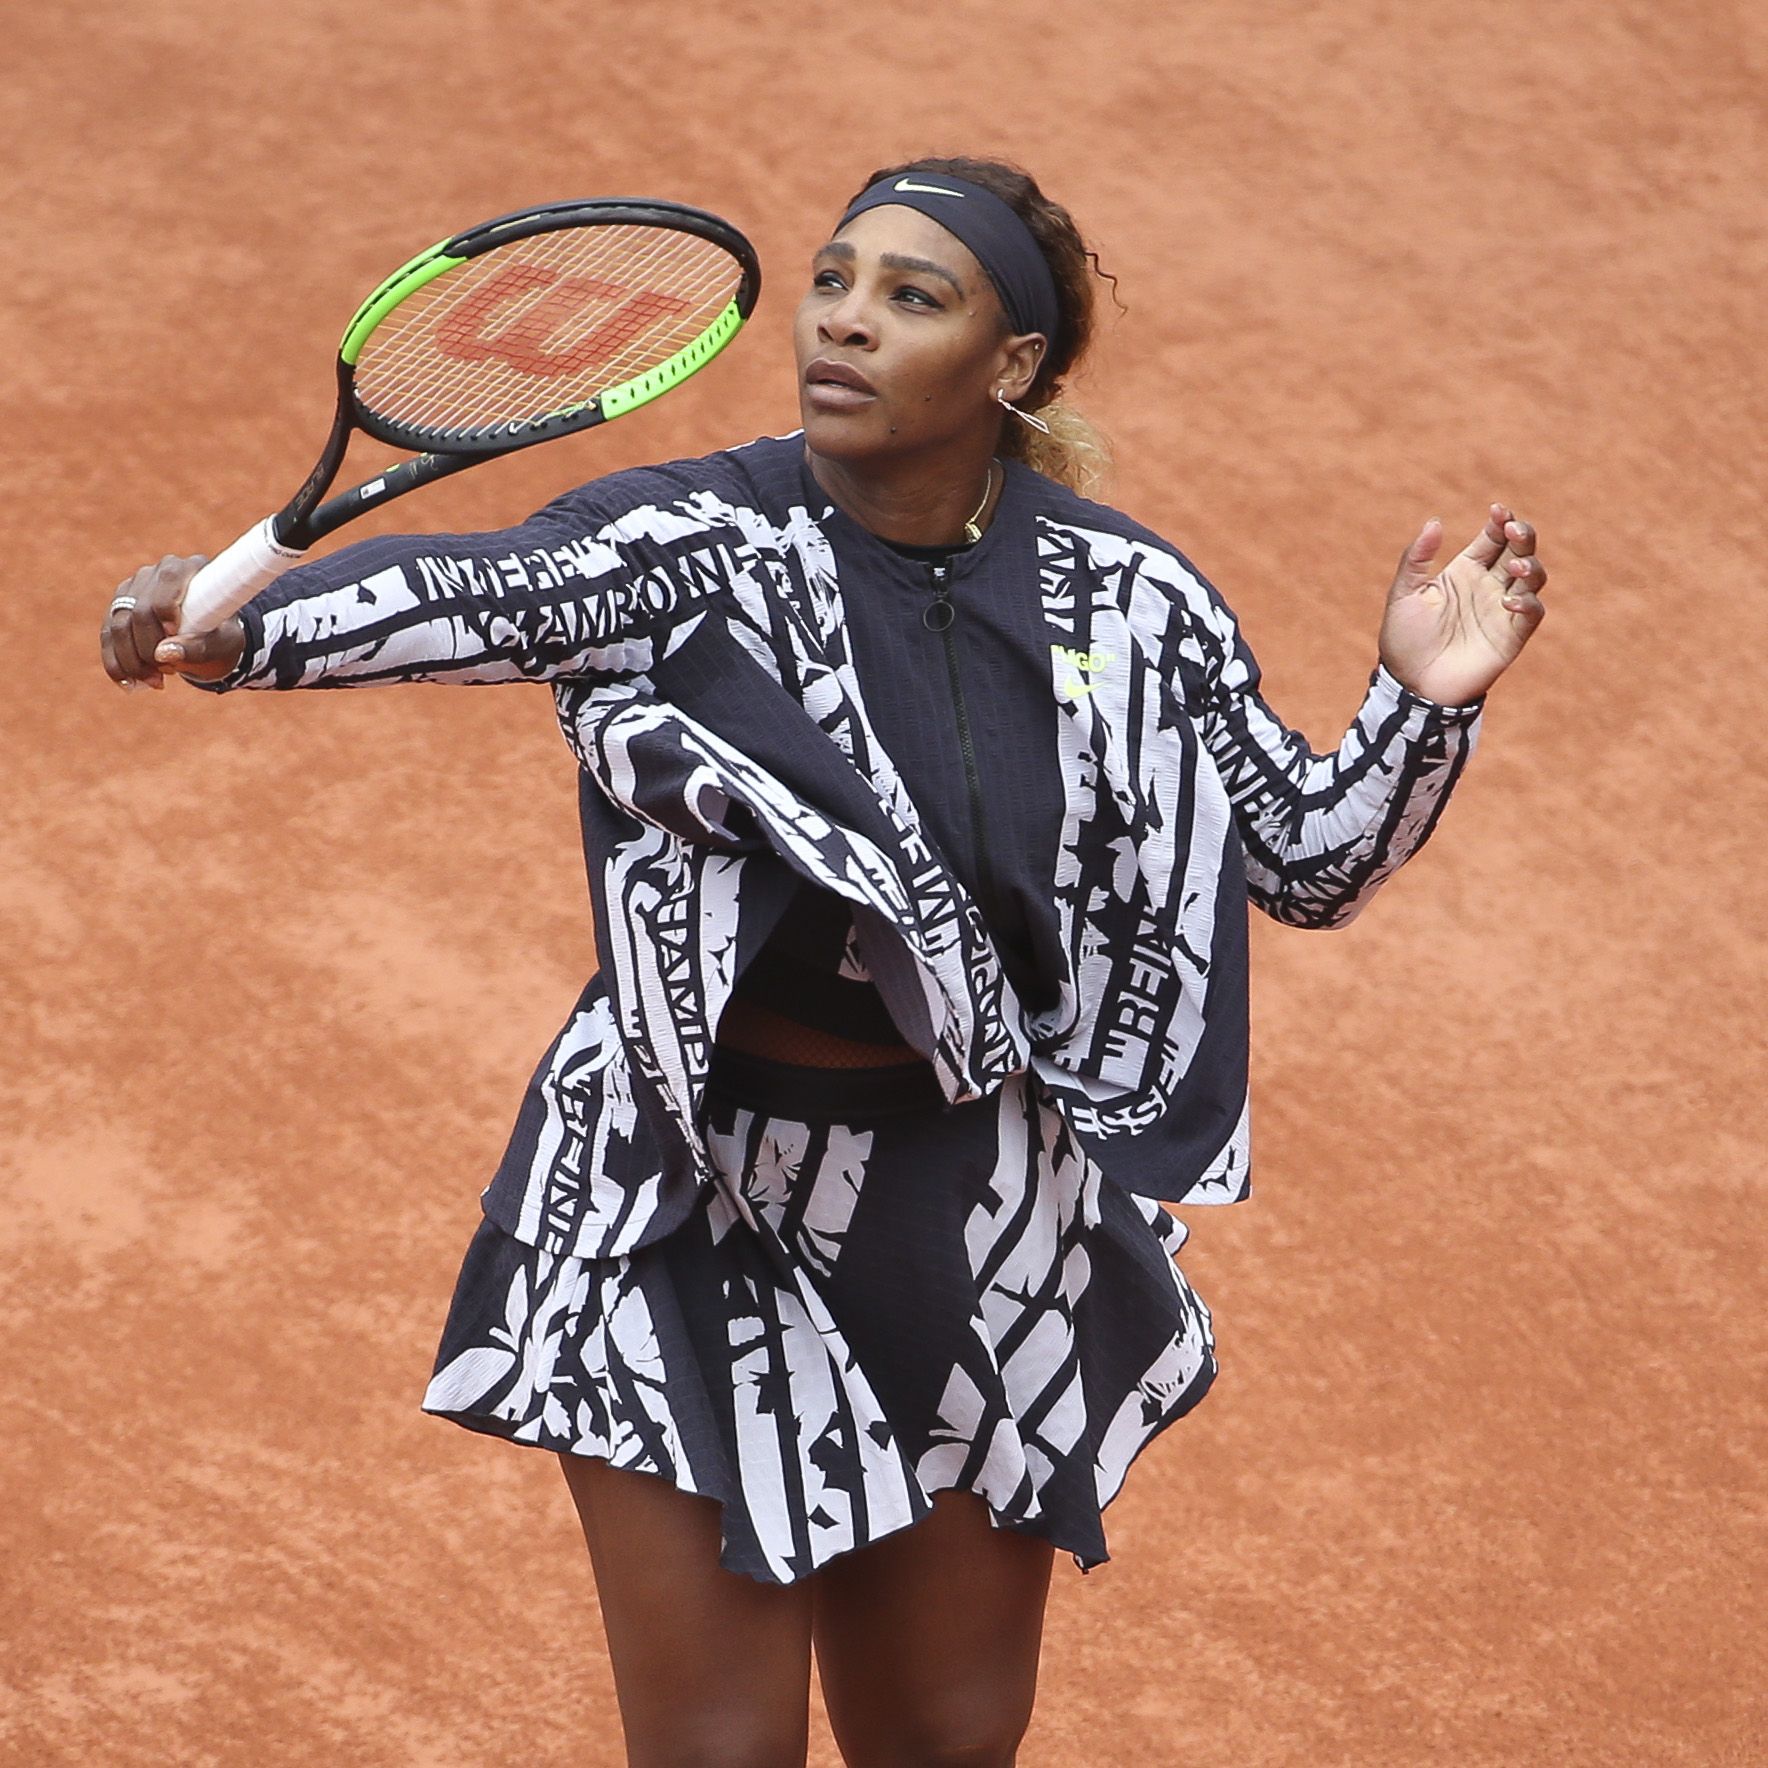 Serena Williams Virgil Abloh off-white design at French Open